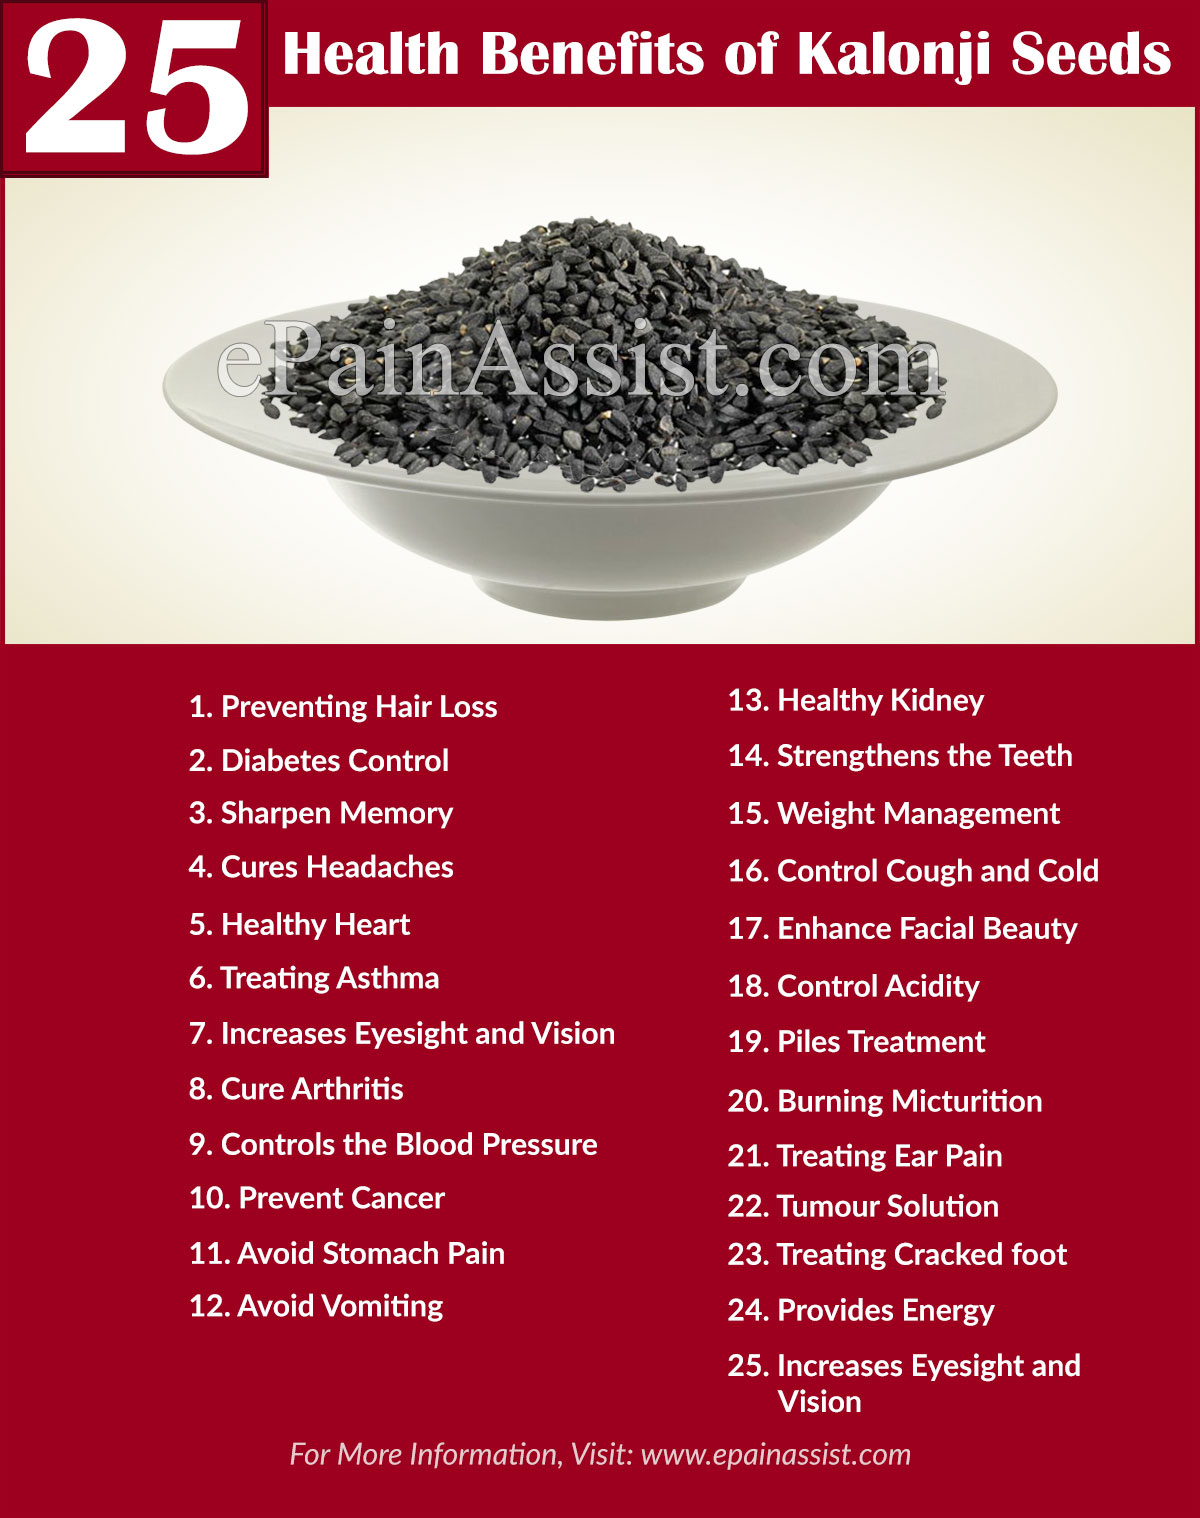 Top 175+ How to use nigella seeds for hair growth - Whendannymetsally.com